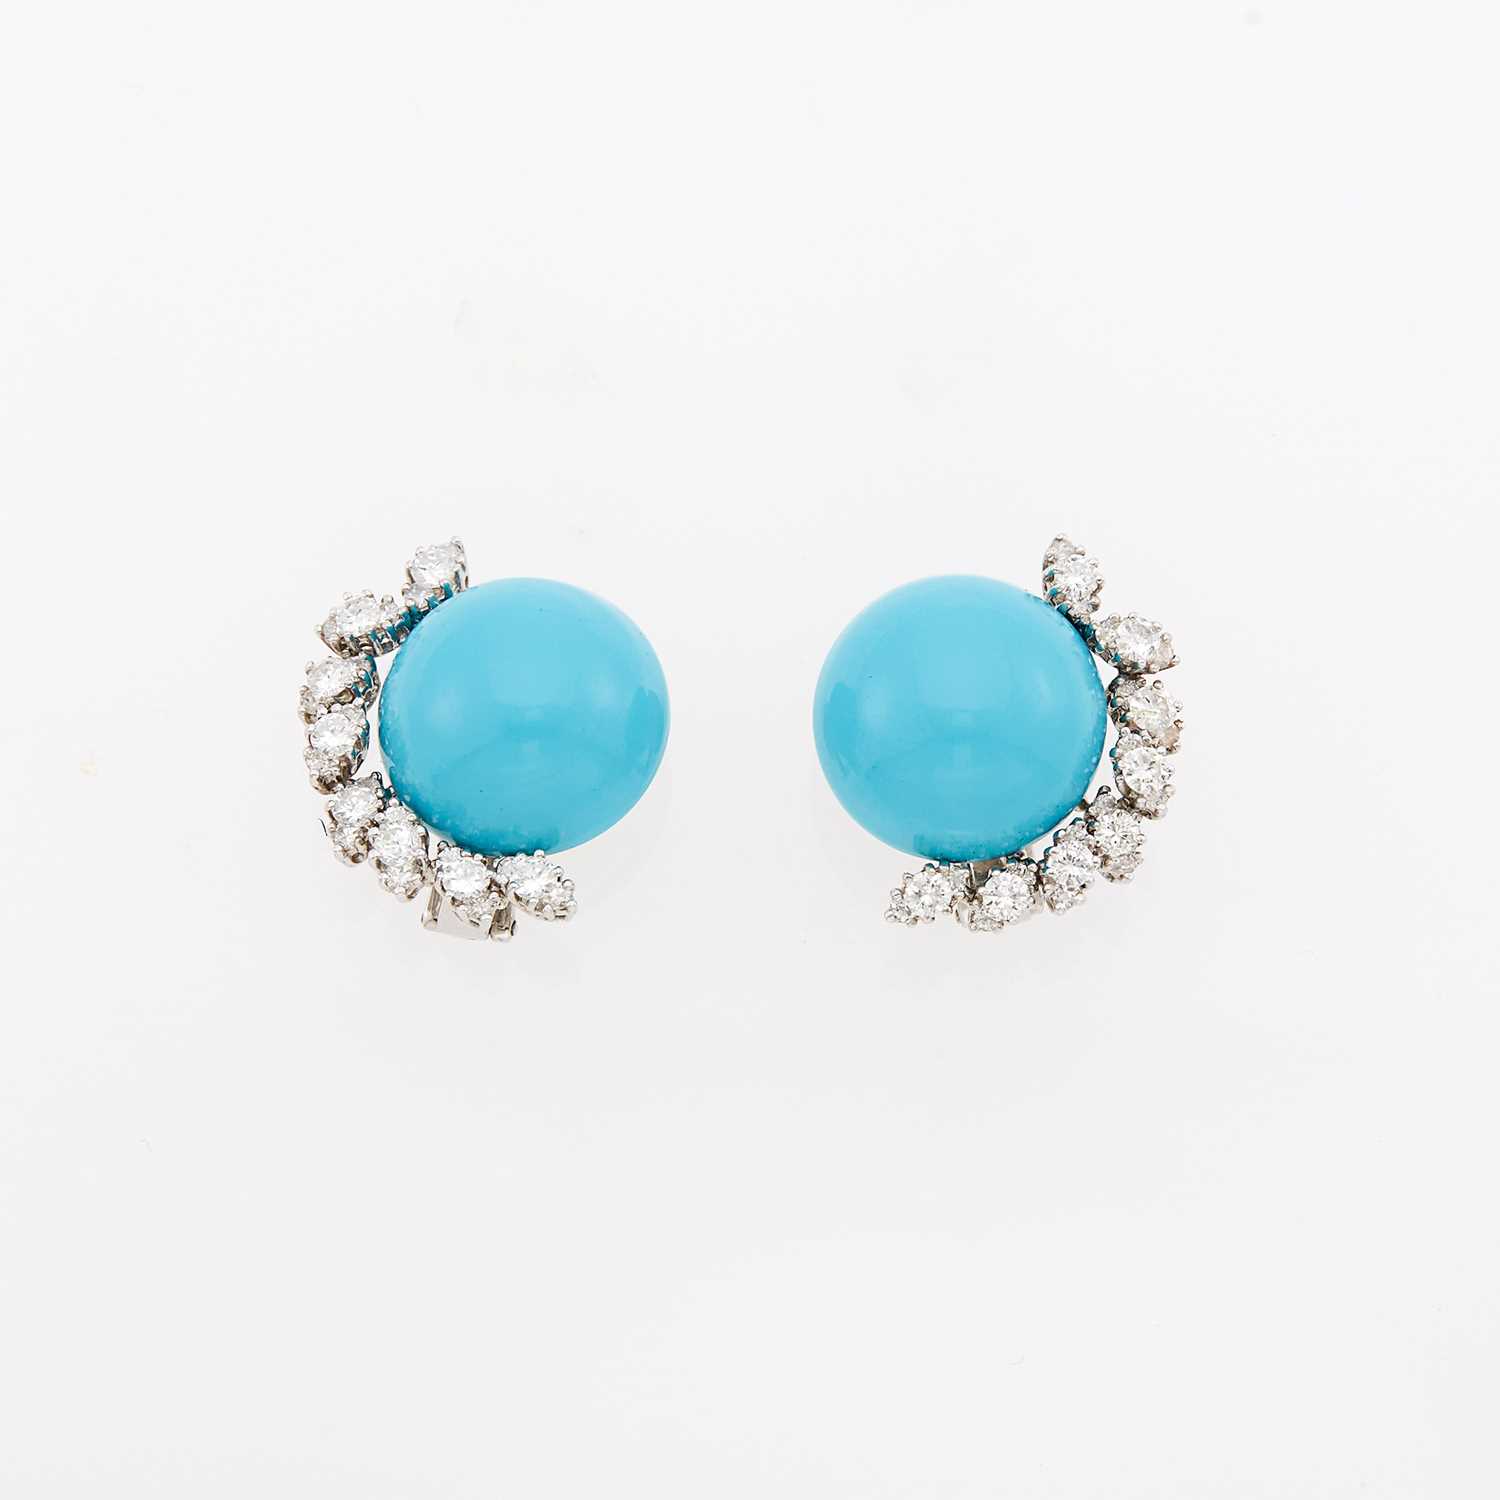 Lot 1052 - Pair of White Gold, Imitation Turquoise and Diamond Earclips